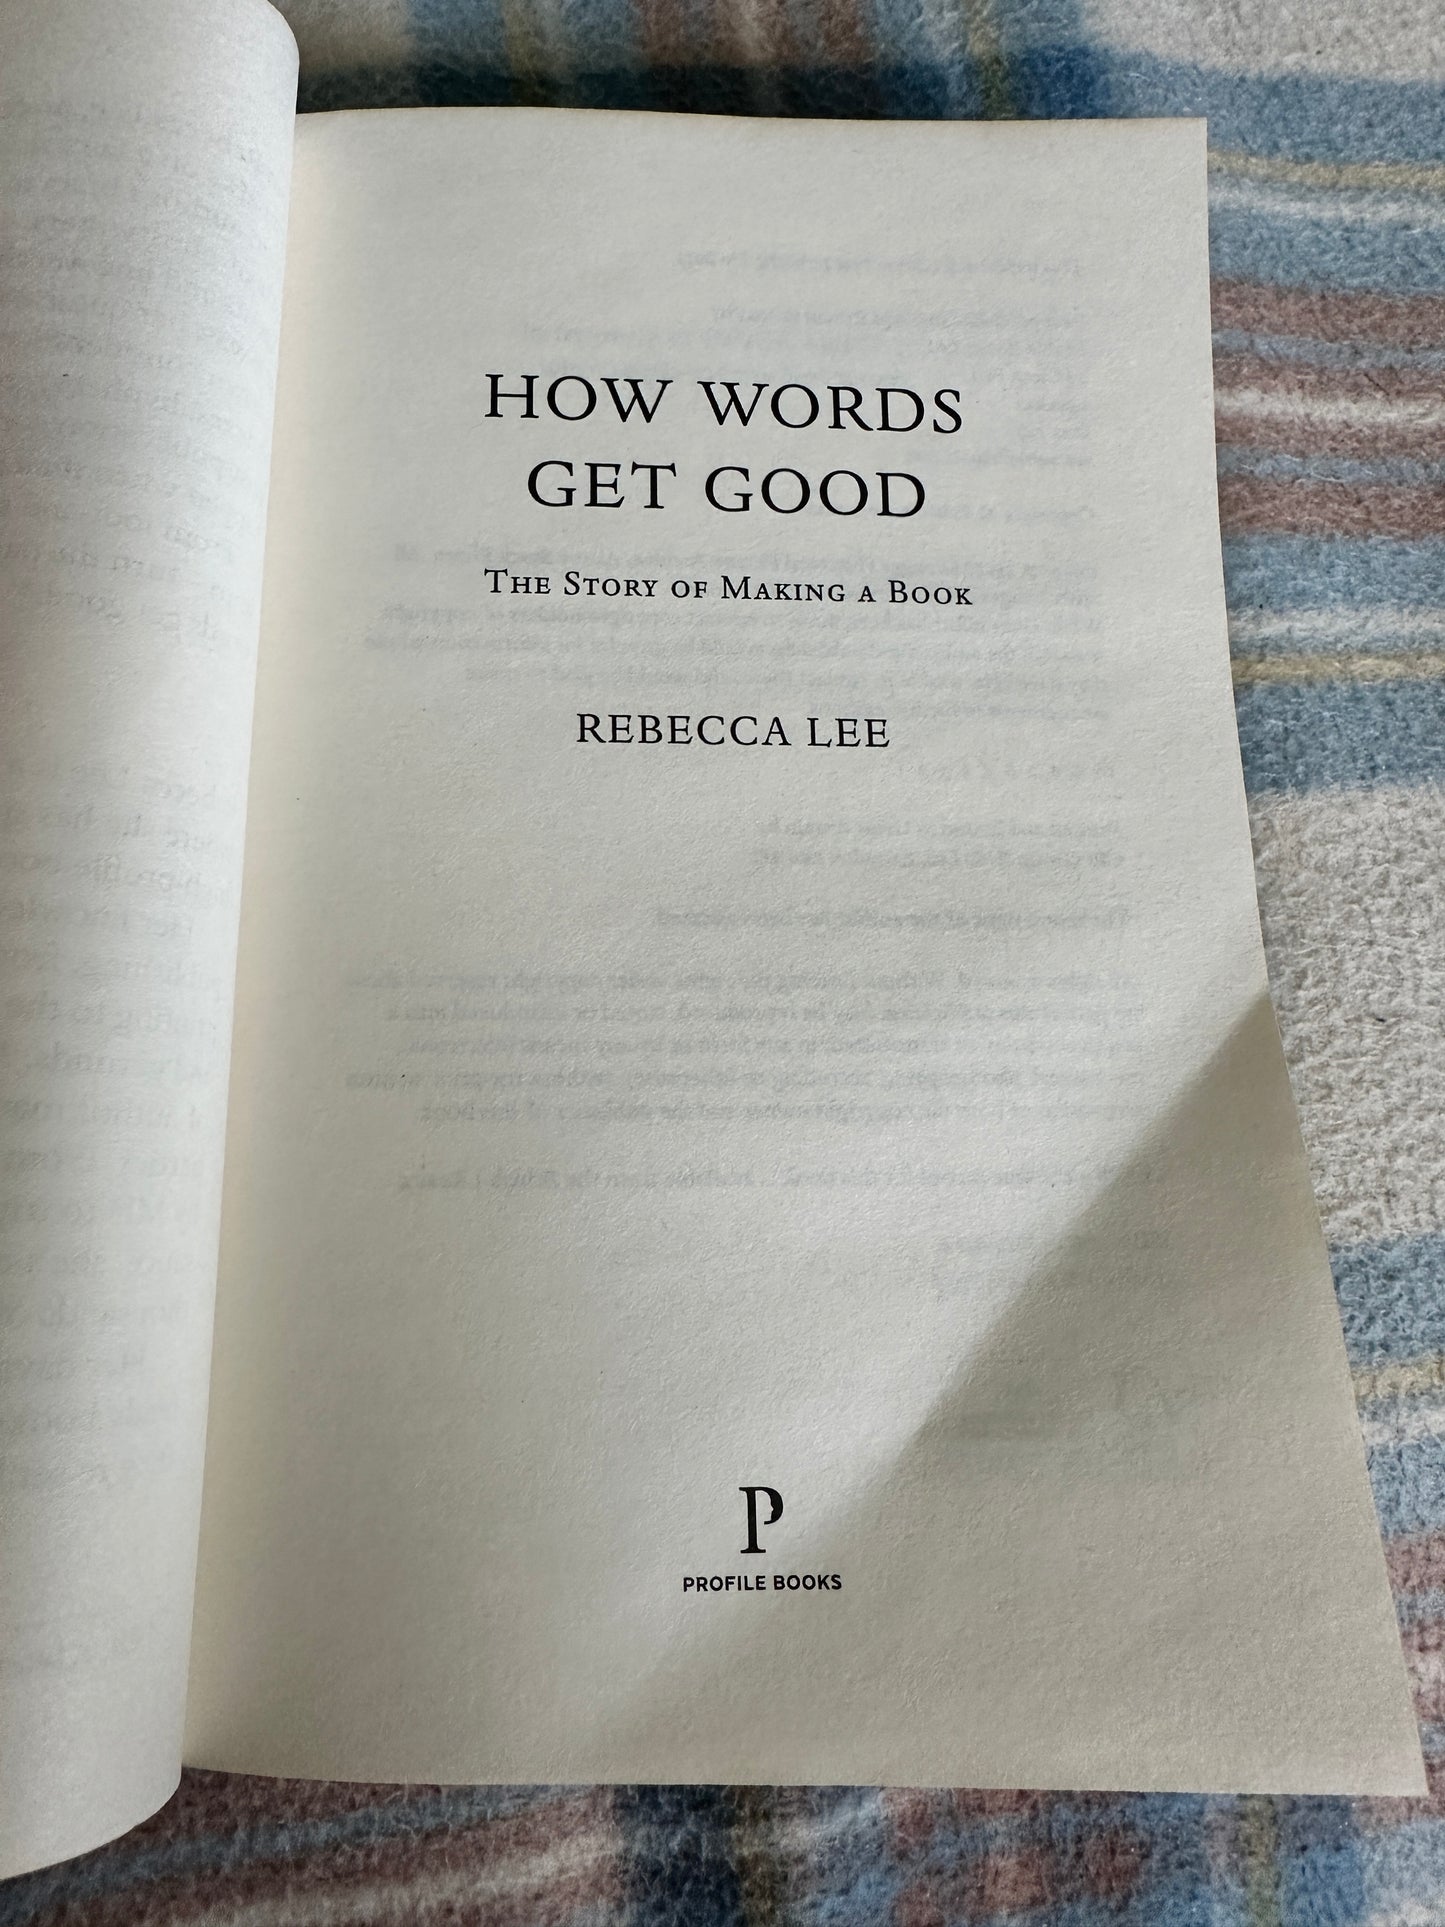 2023*1st* How Words Get Good - Rebecca Lee(Profile Books)